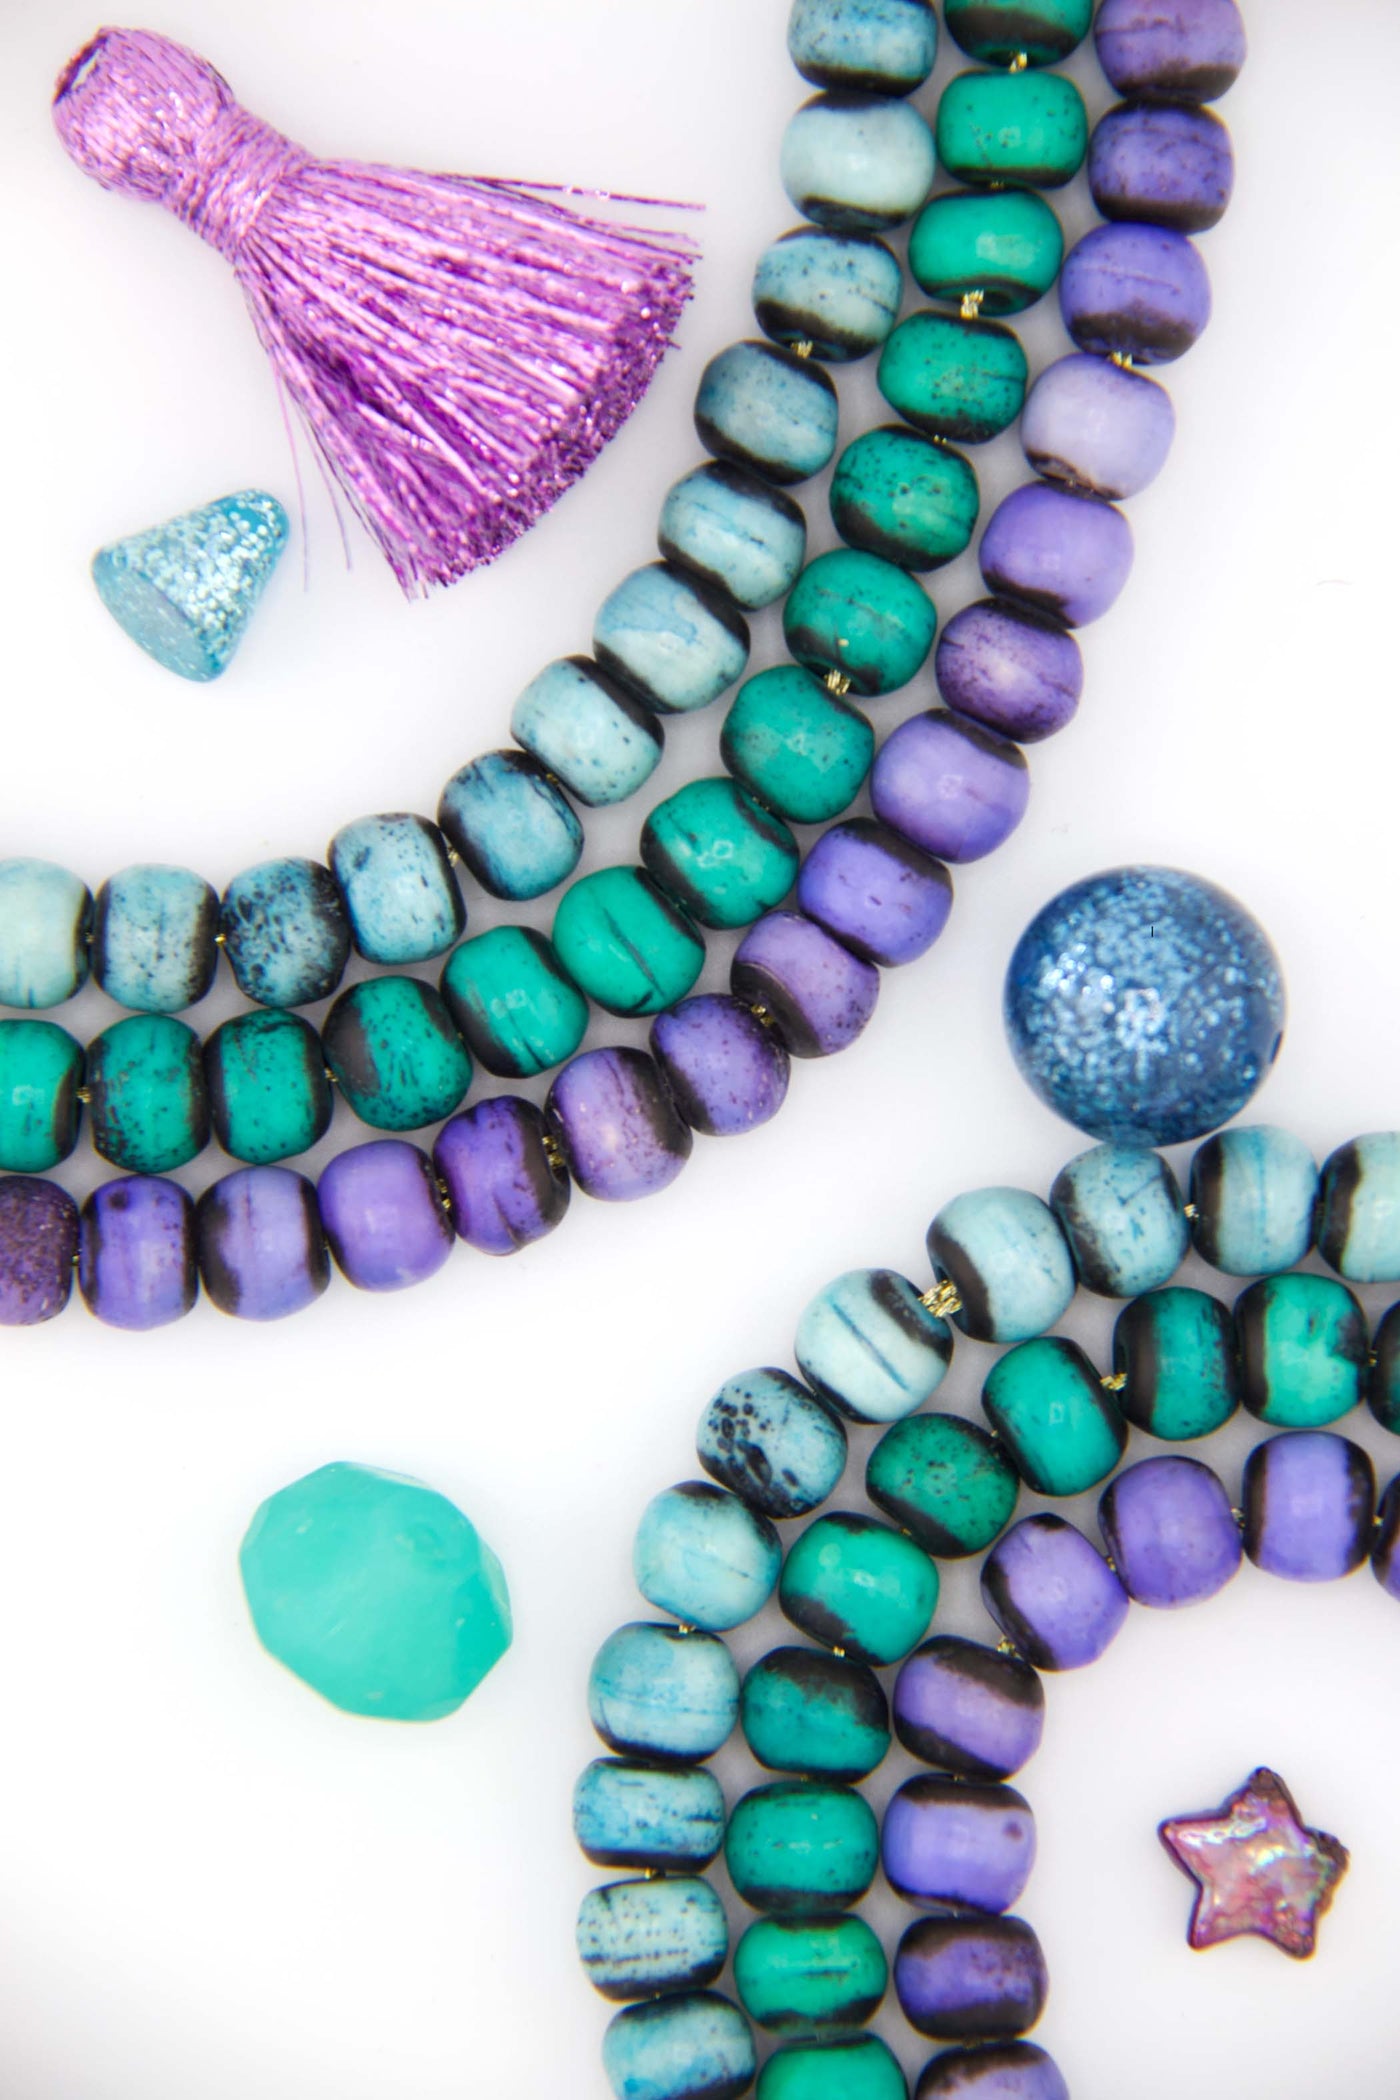 Aurora Borealis Beads: Aqua for the serene sky, Purple for the majestic night, & Turquoise for water